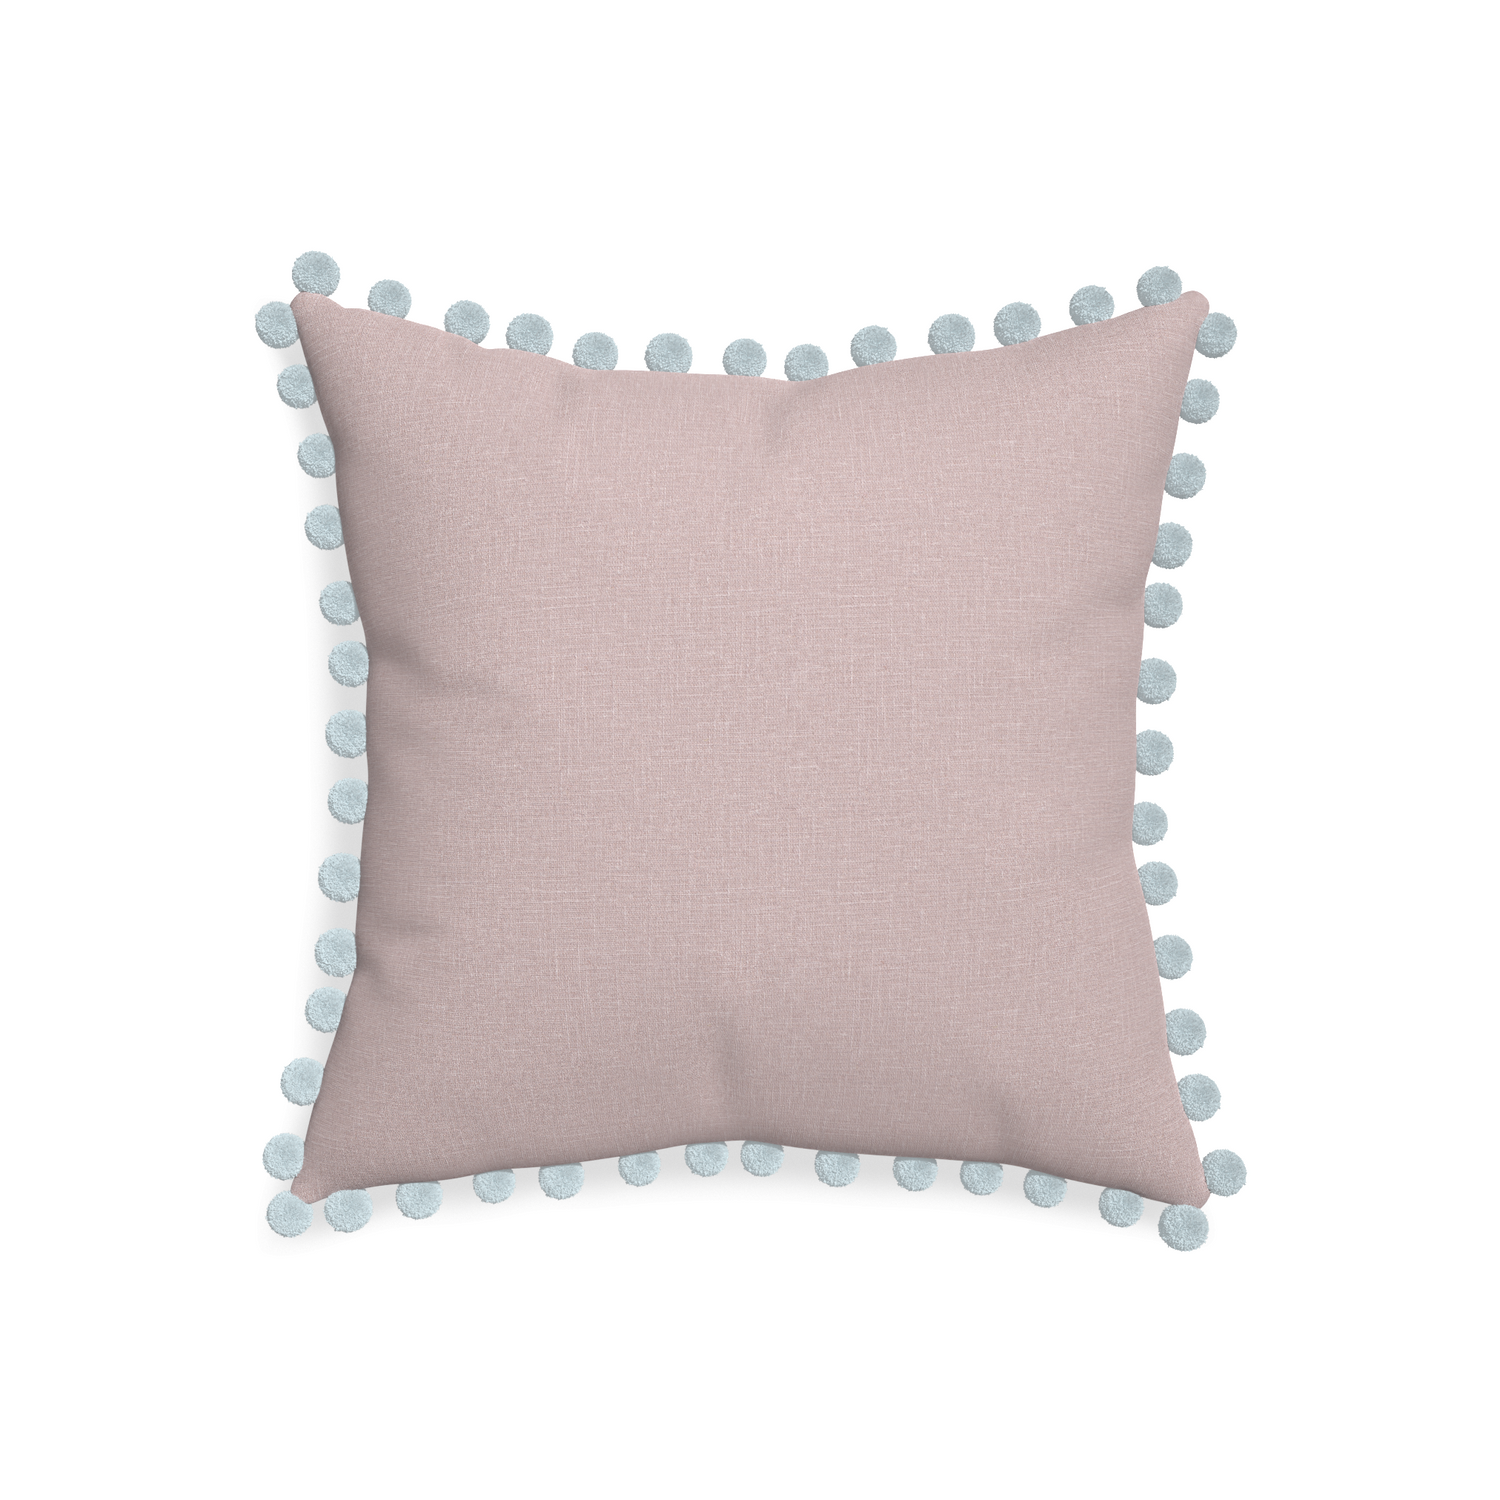 20-square orchid custom mauve pinkpillow with powder pom pom on white background